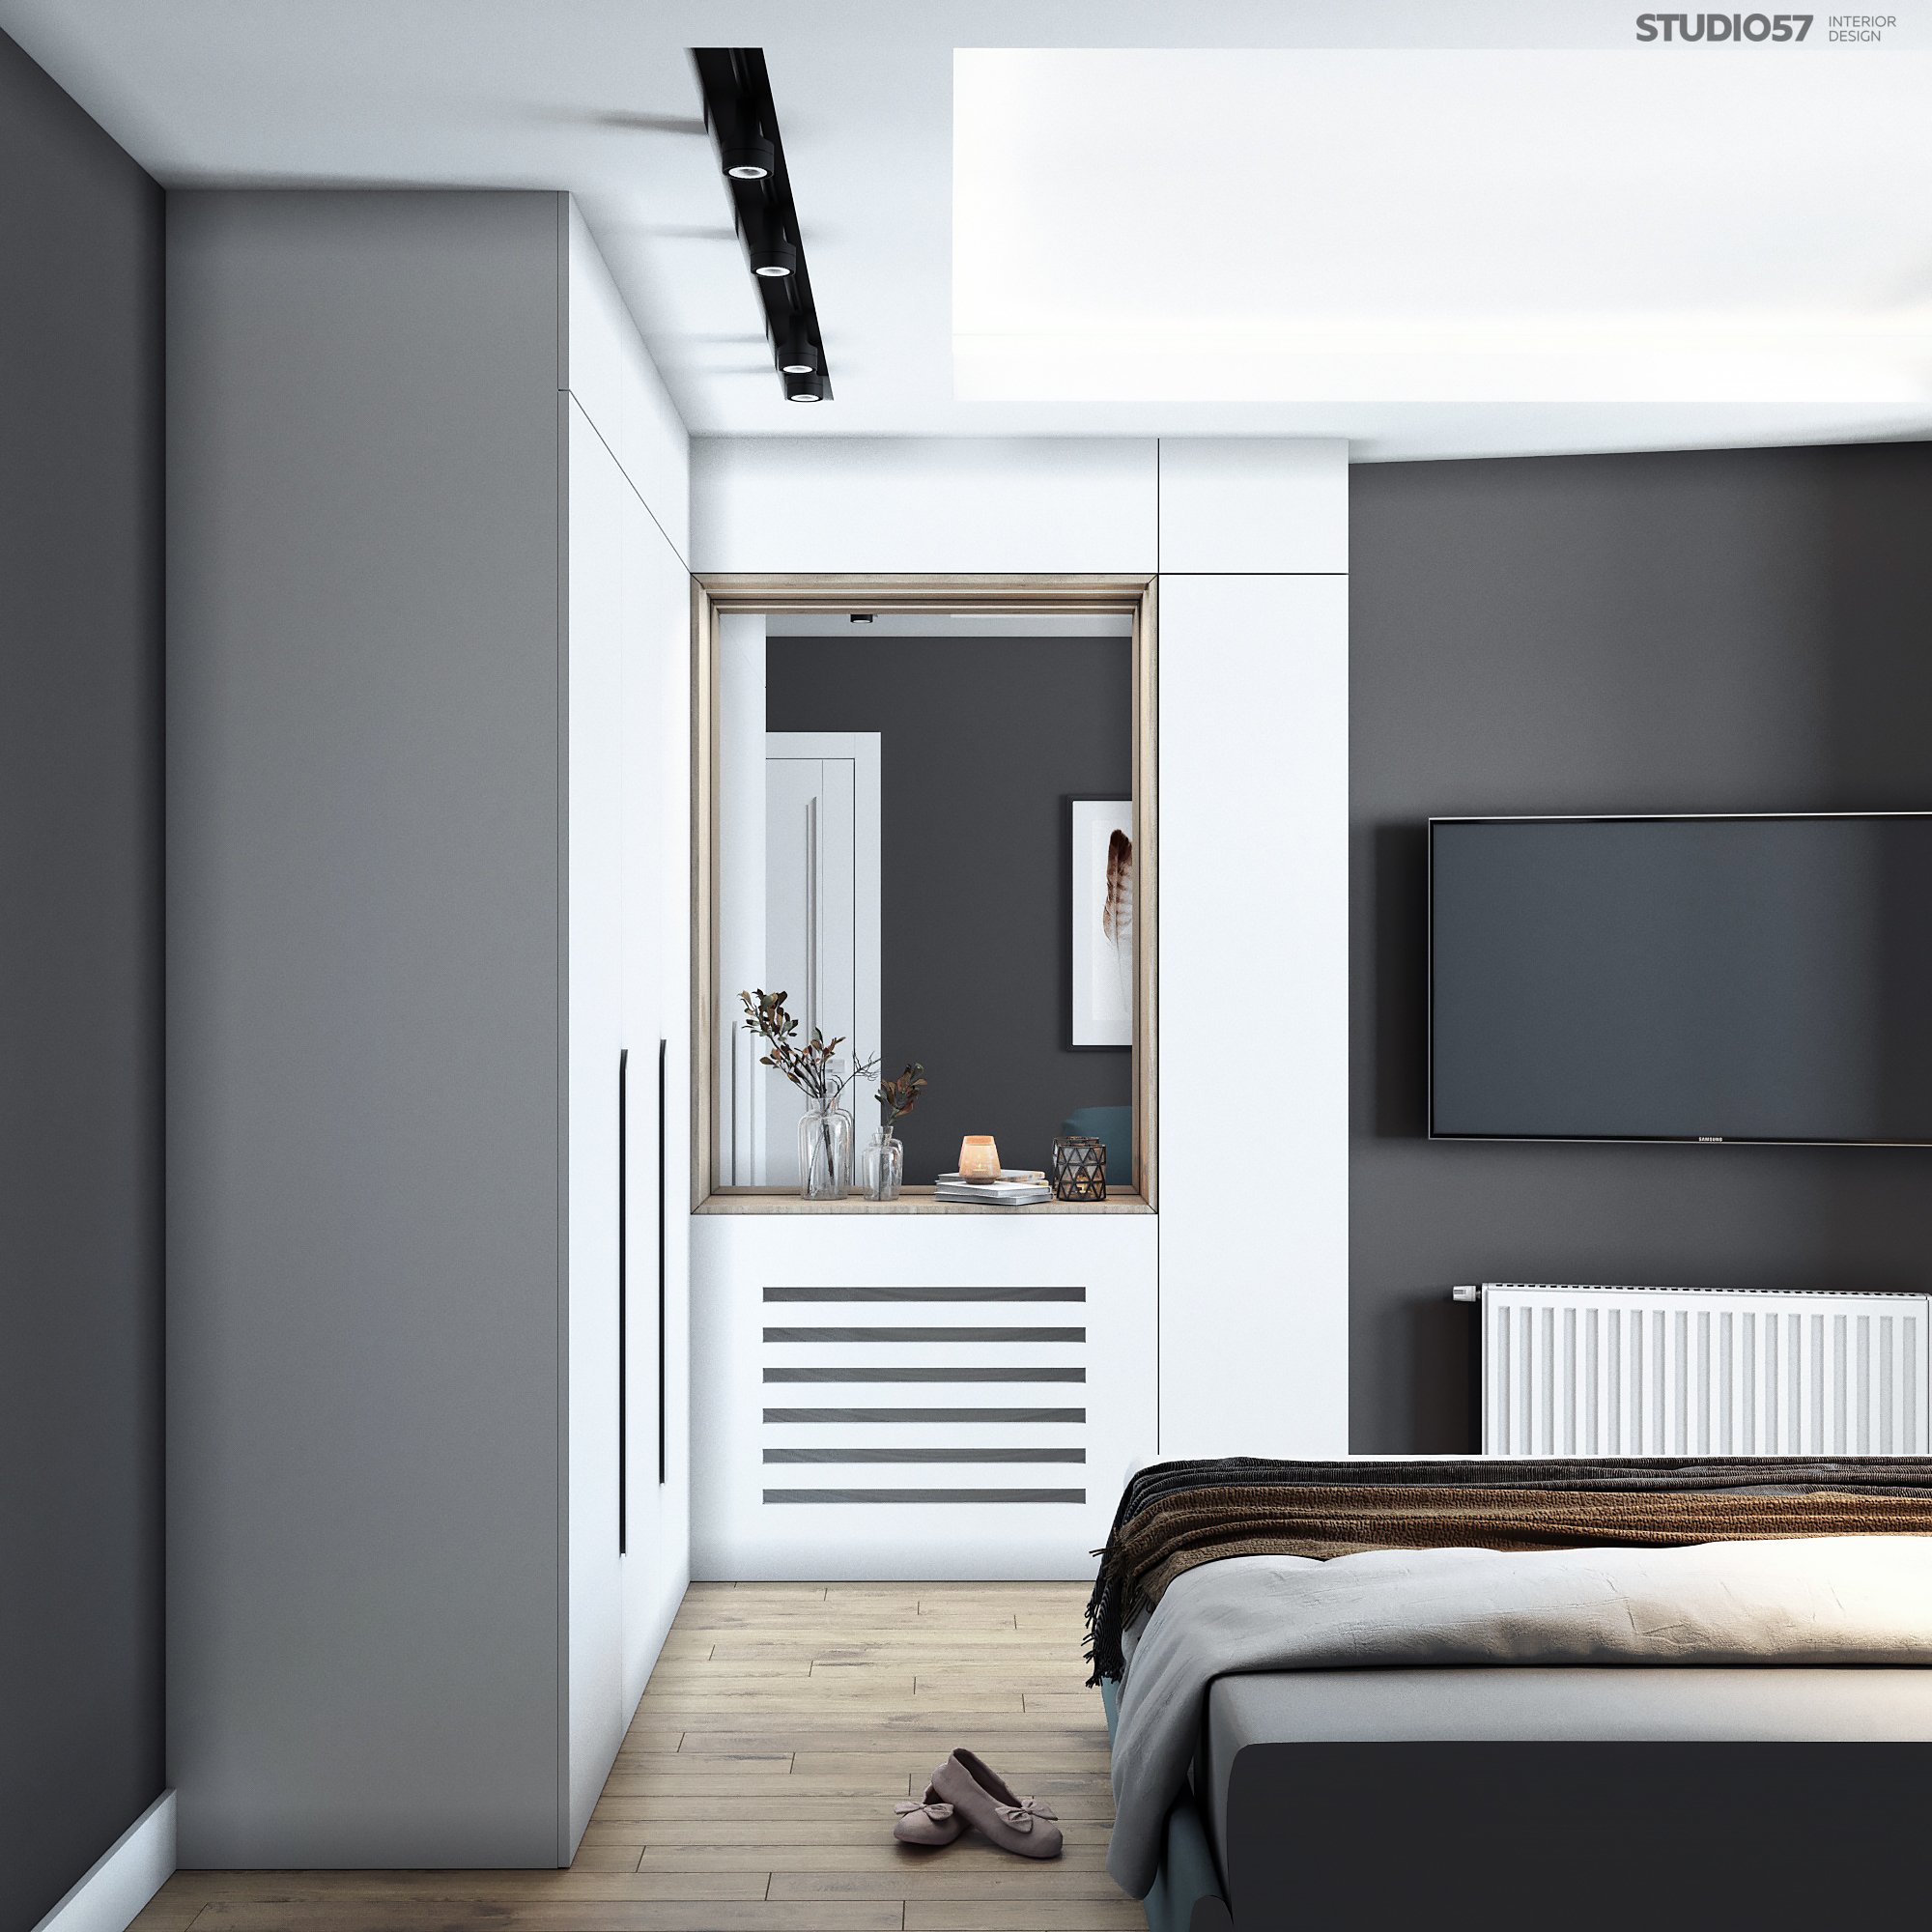 Bedroom in gray colors picture